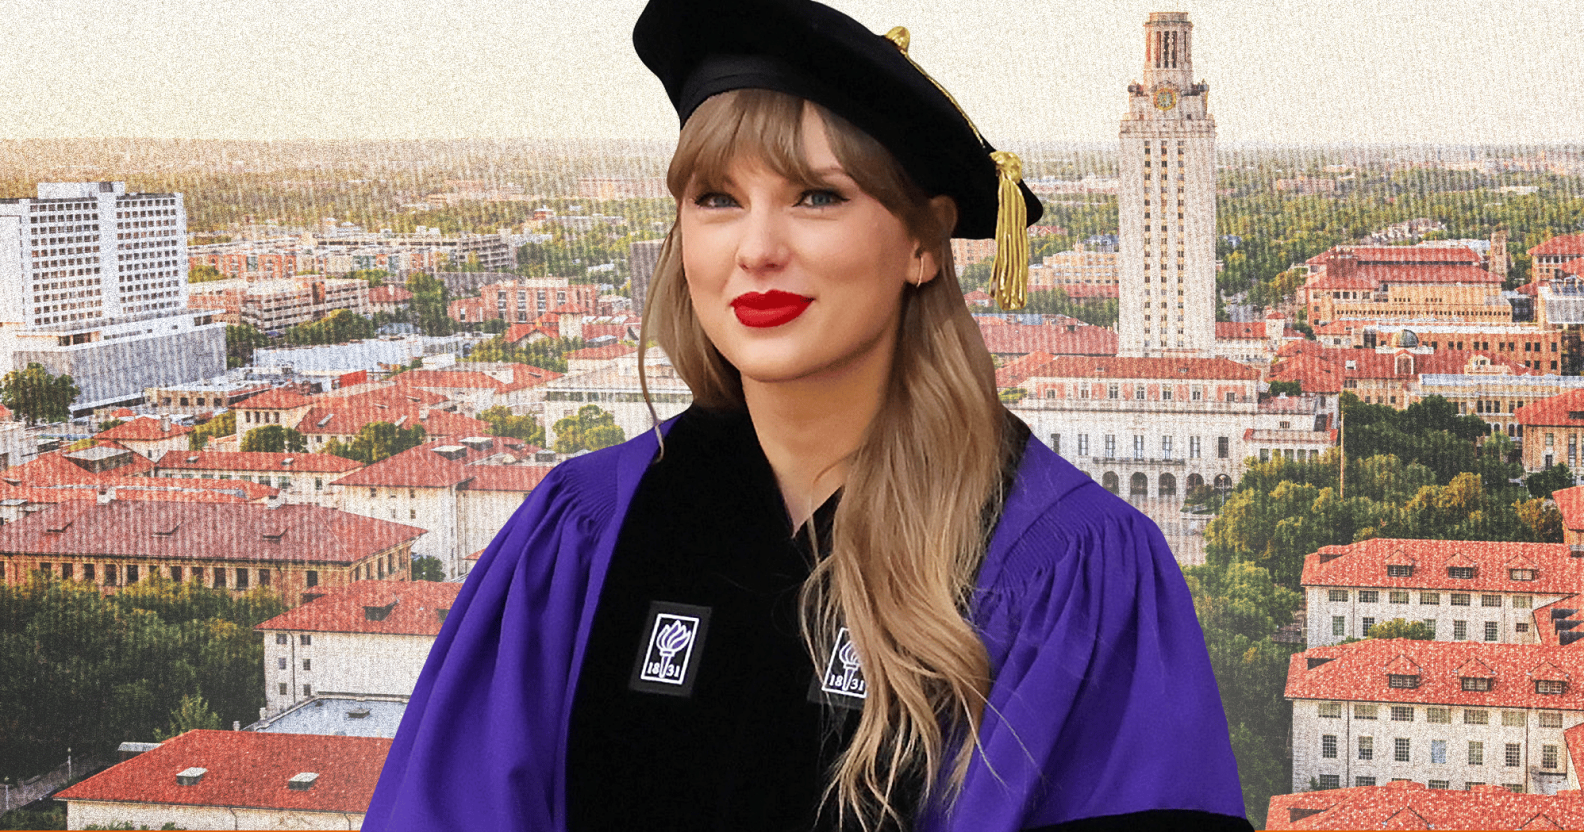 Taylor Swift in her NYU honorary graduate speaker robes photoshopped onto backdrop of city.